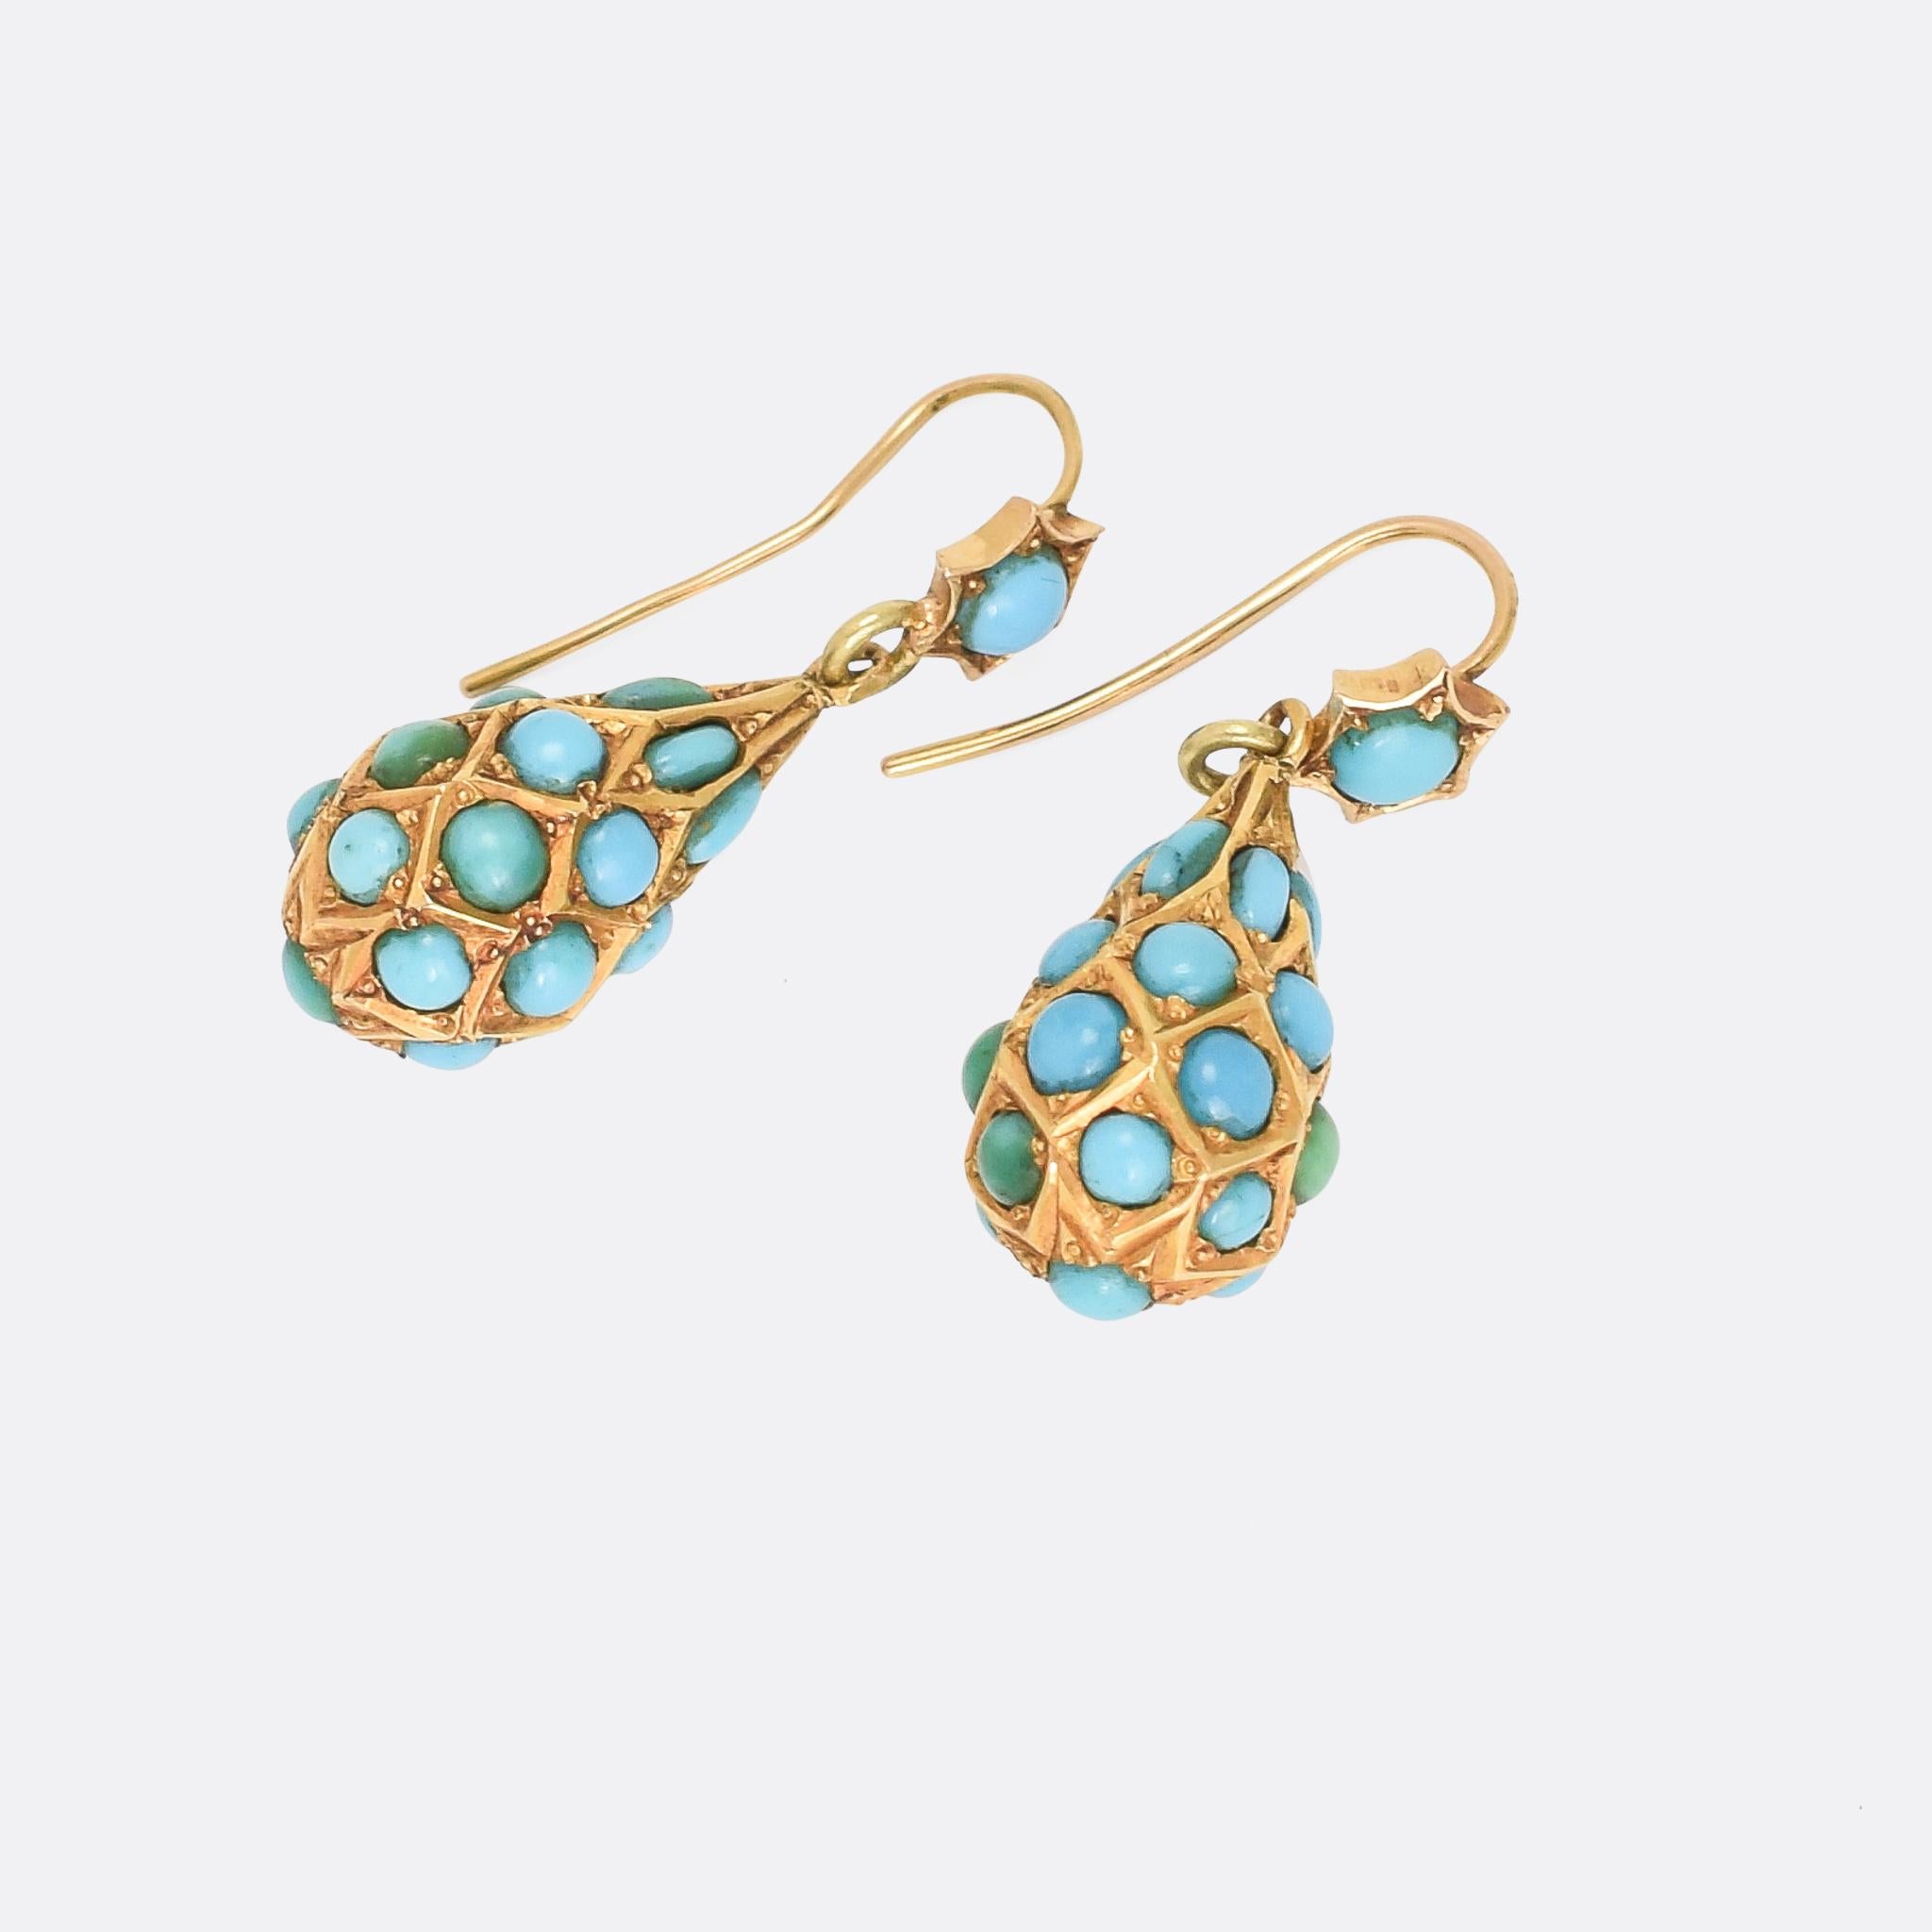 A delightful pair of antique earrings dated from the late Victorian era. each pear-shaped drop is studded with Persian turquoise cabochons all around, and dangles freely from a turquoise-set ear wire. They're particularly well made, crafted in 15k